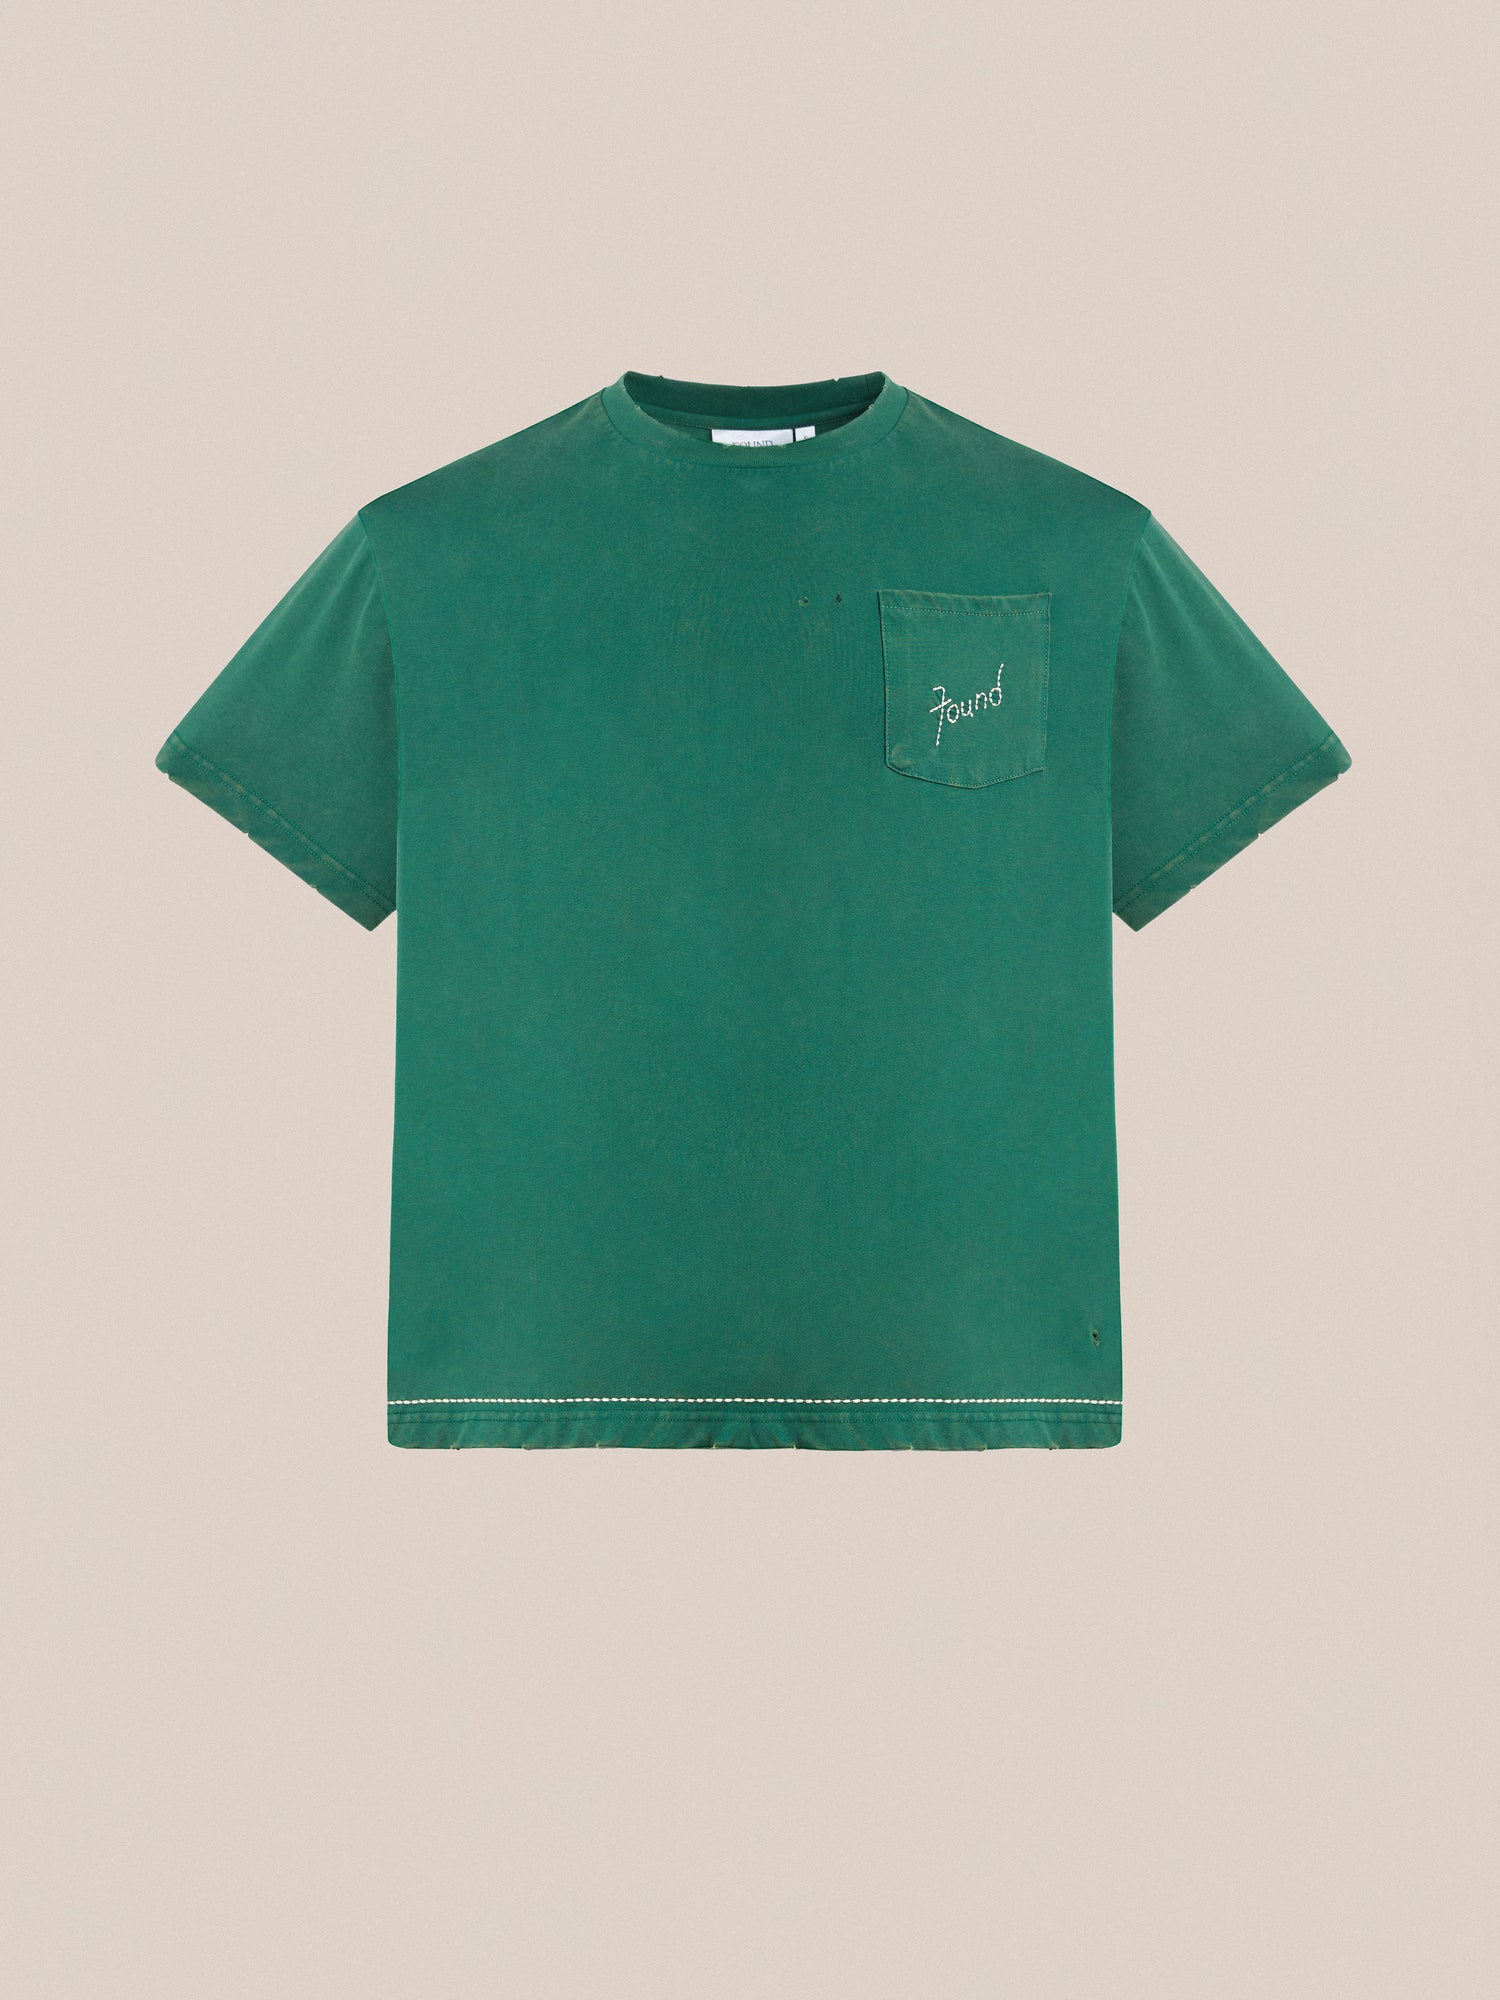 A green Embroidered Logo Tee with a pocket by Found.